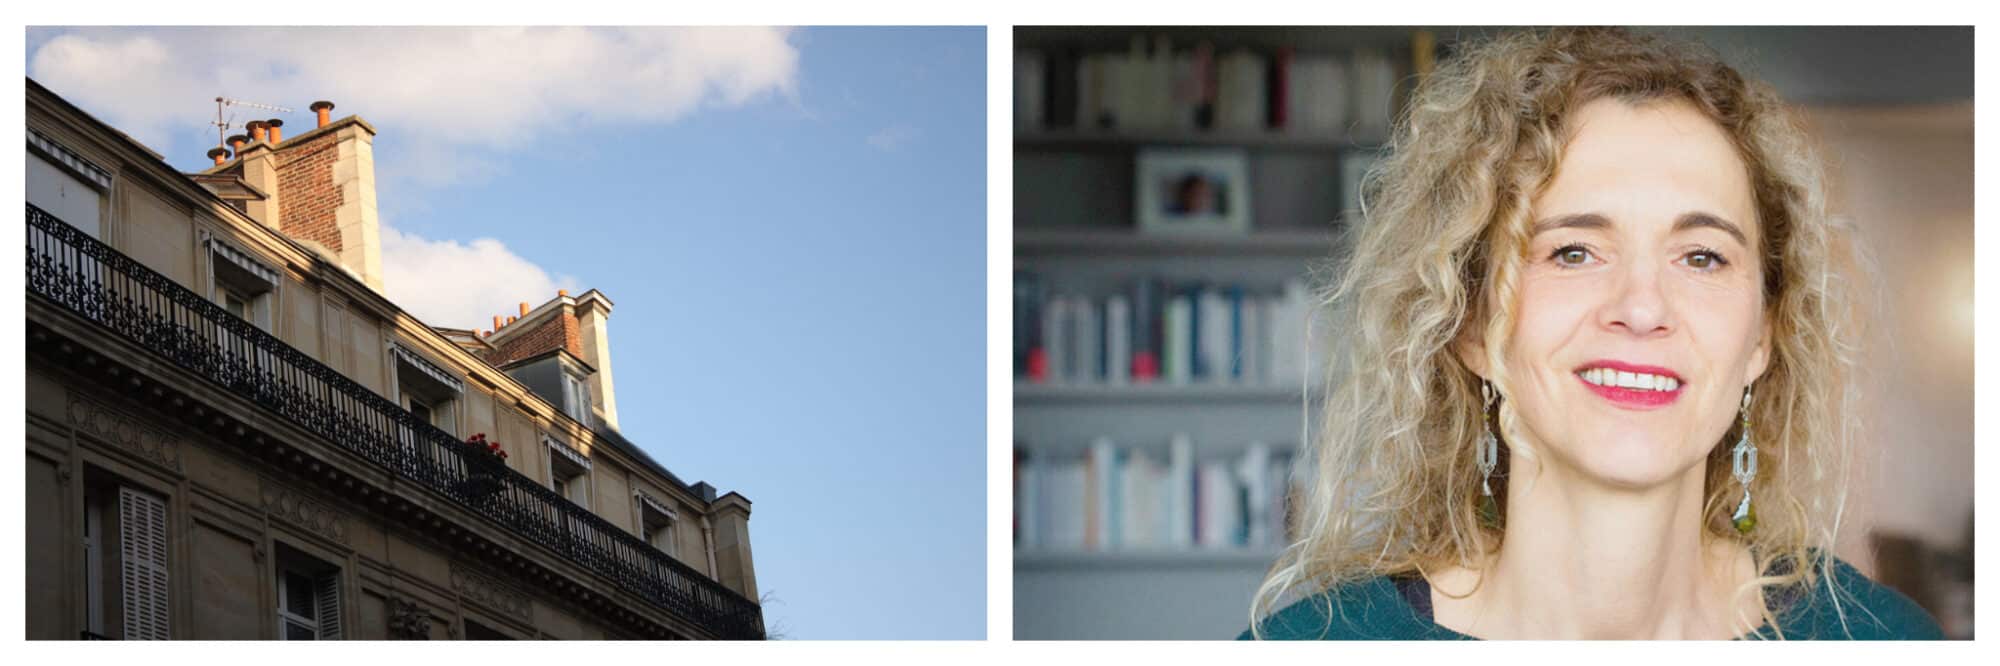 Left: The top of an apartment building in Paris as the sun sets on the roof, blue sky and cloud are visible in the background, Right: A portrait of Delphine de Vigan, wearing a blue shirt and standing in front of a wall of books